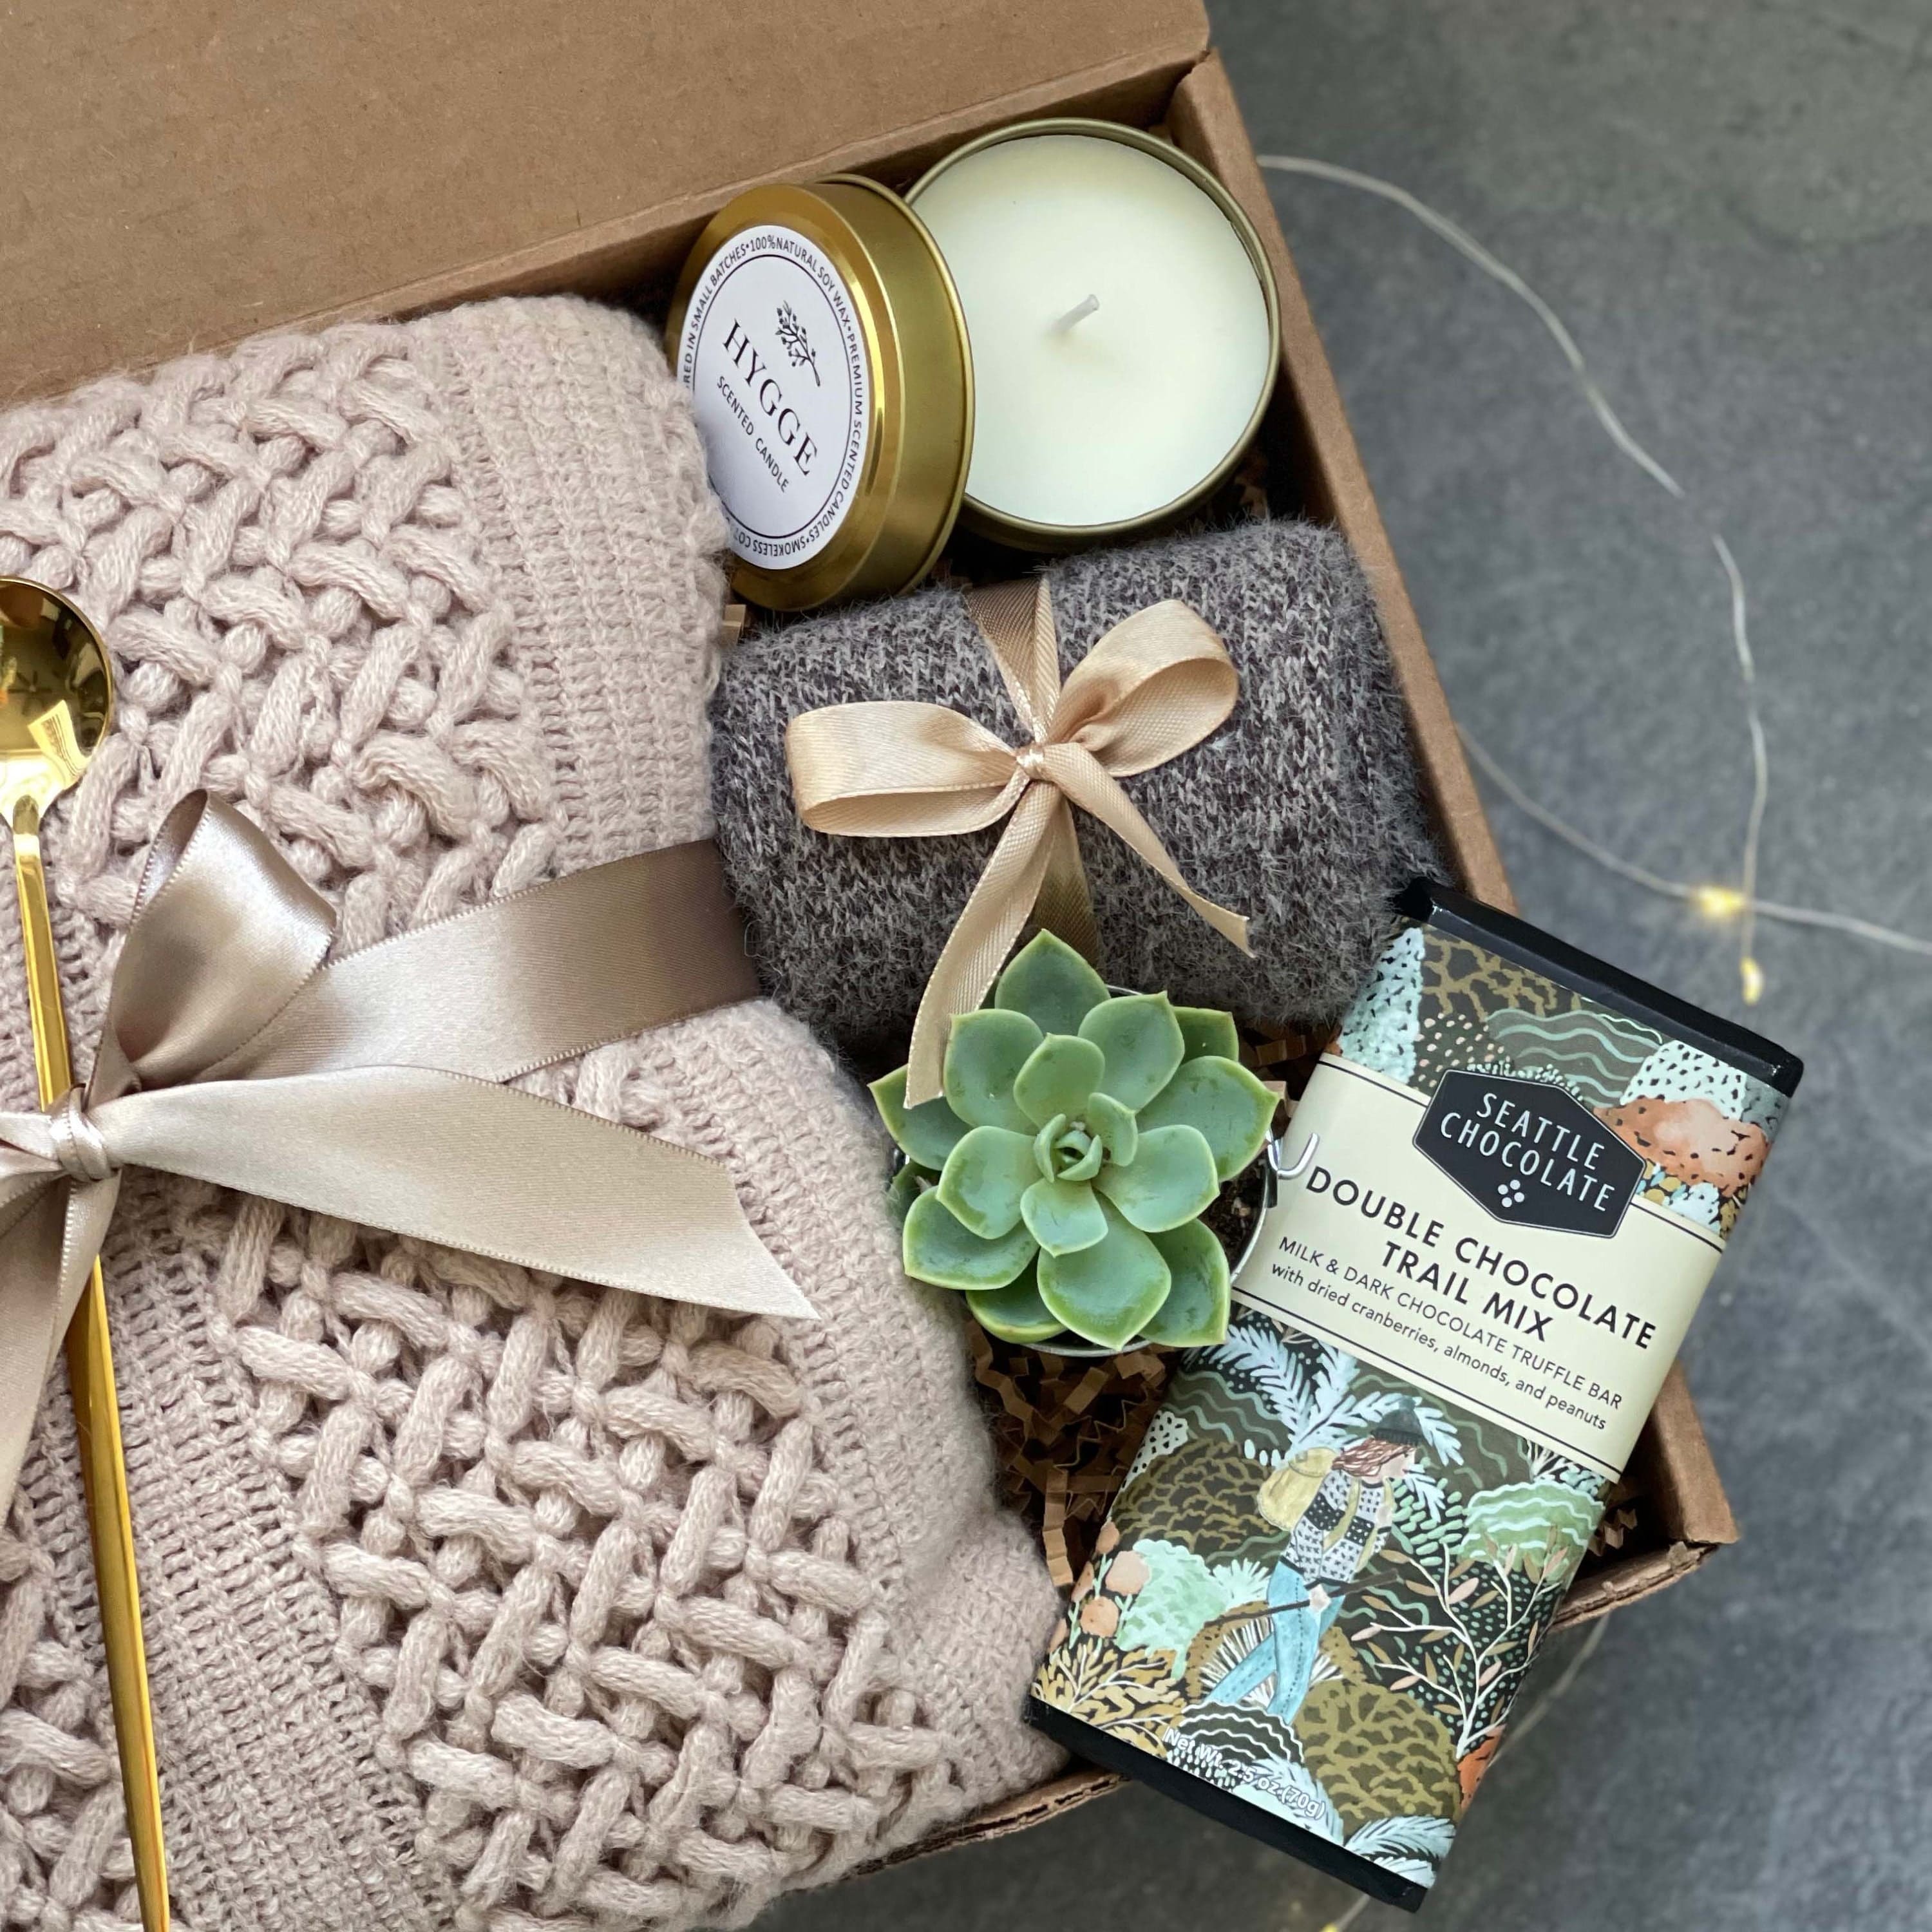 Gentle LOVE, Self-Love and Care gift box | Cleansing & Healing Kit